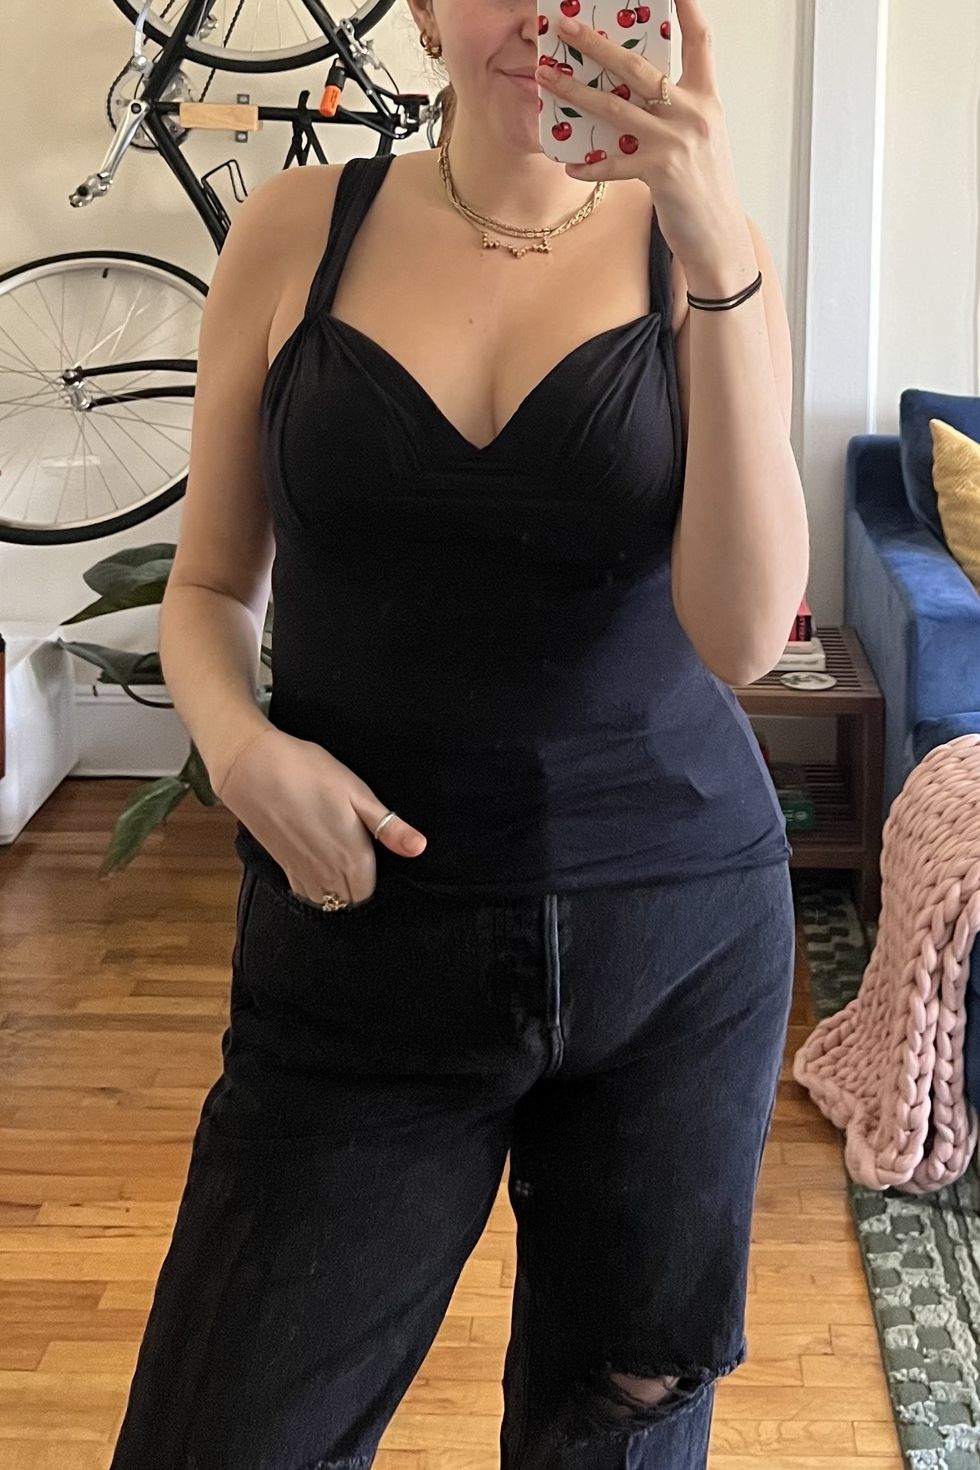 a woman taking a selfie with a black tank top while wearing the skims push up bra, skims review